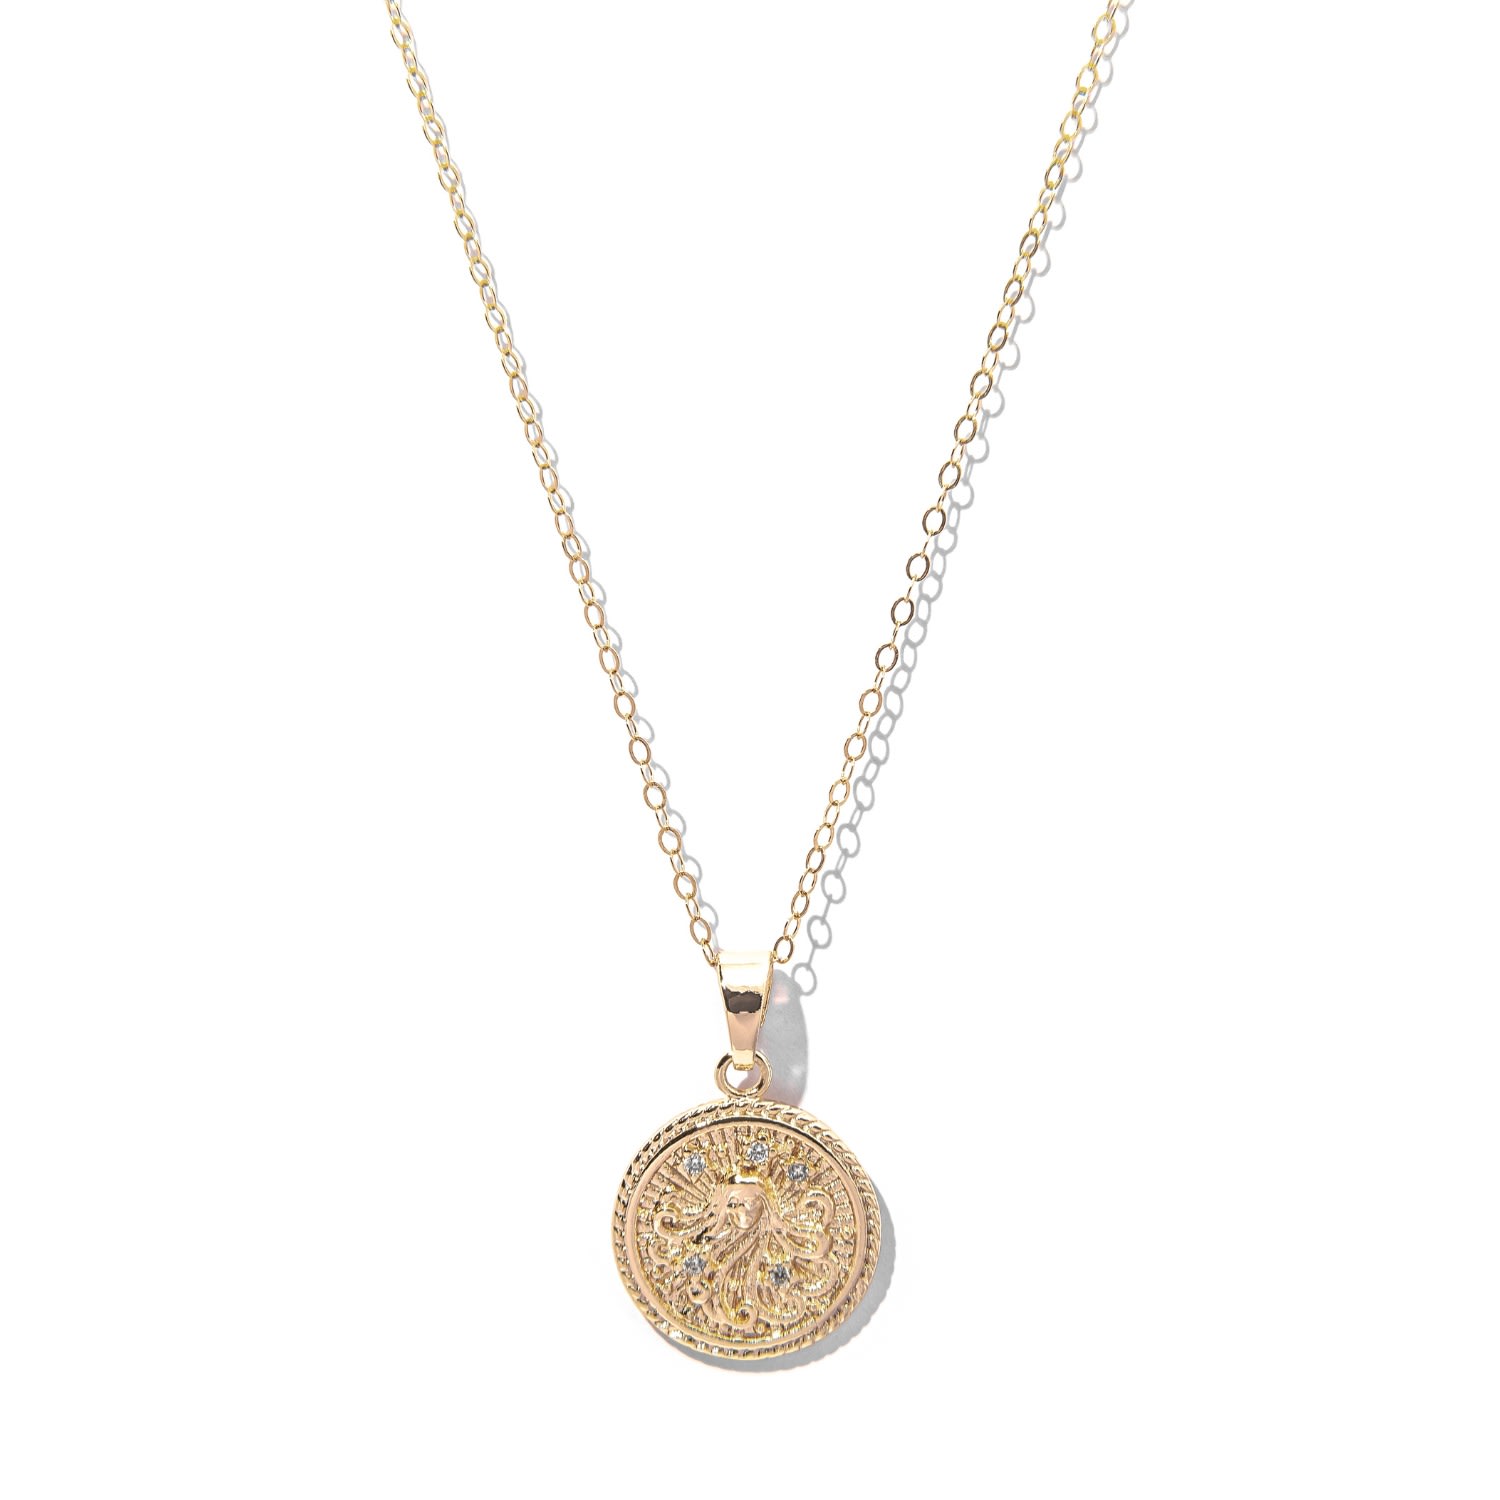 Women's Virgo Zodiac Medallion Pendant Gold Filled Necklace The Essential Jewels